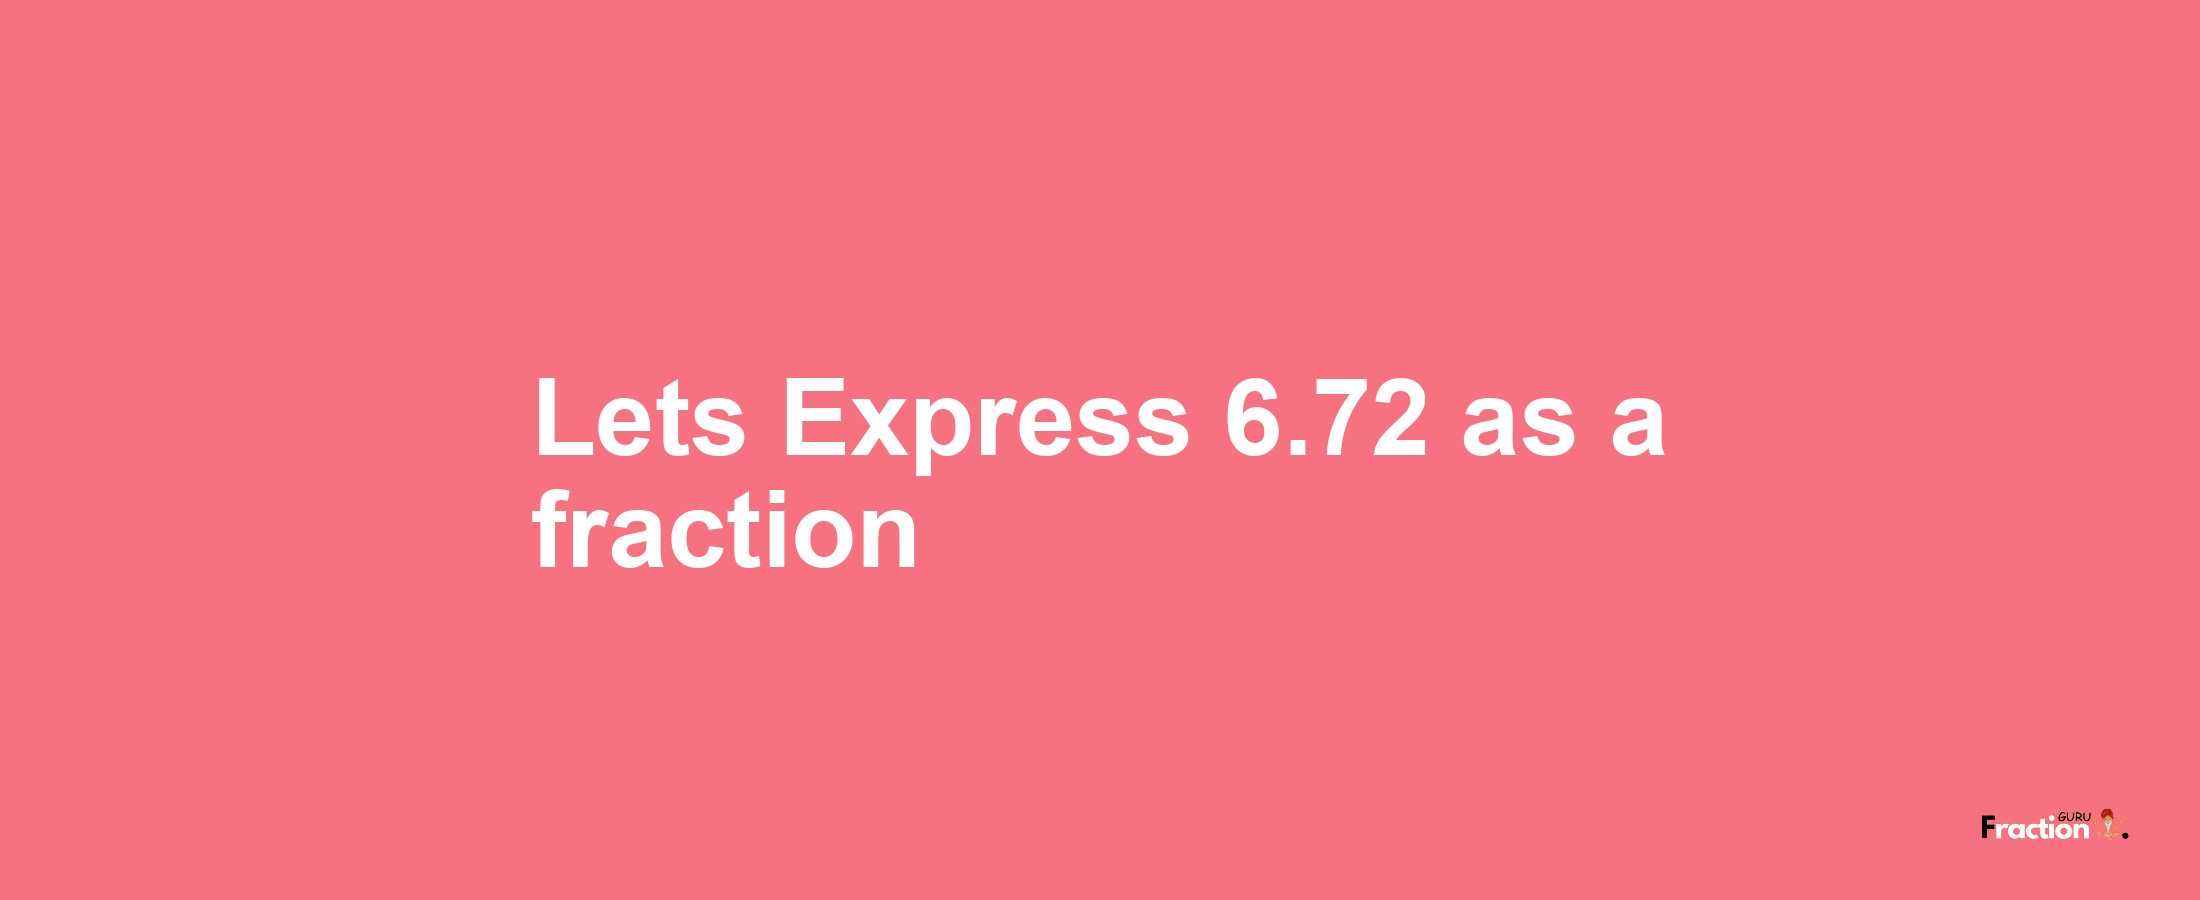 Lets Express 6.72 as afraction